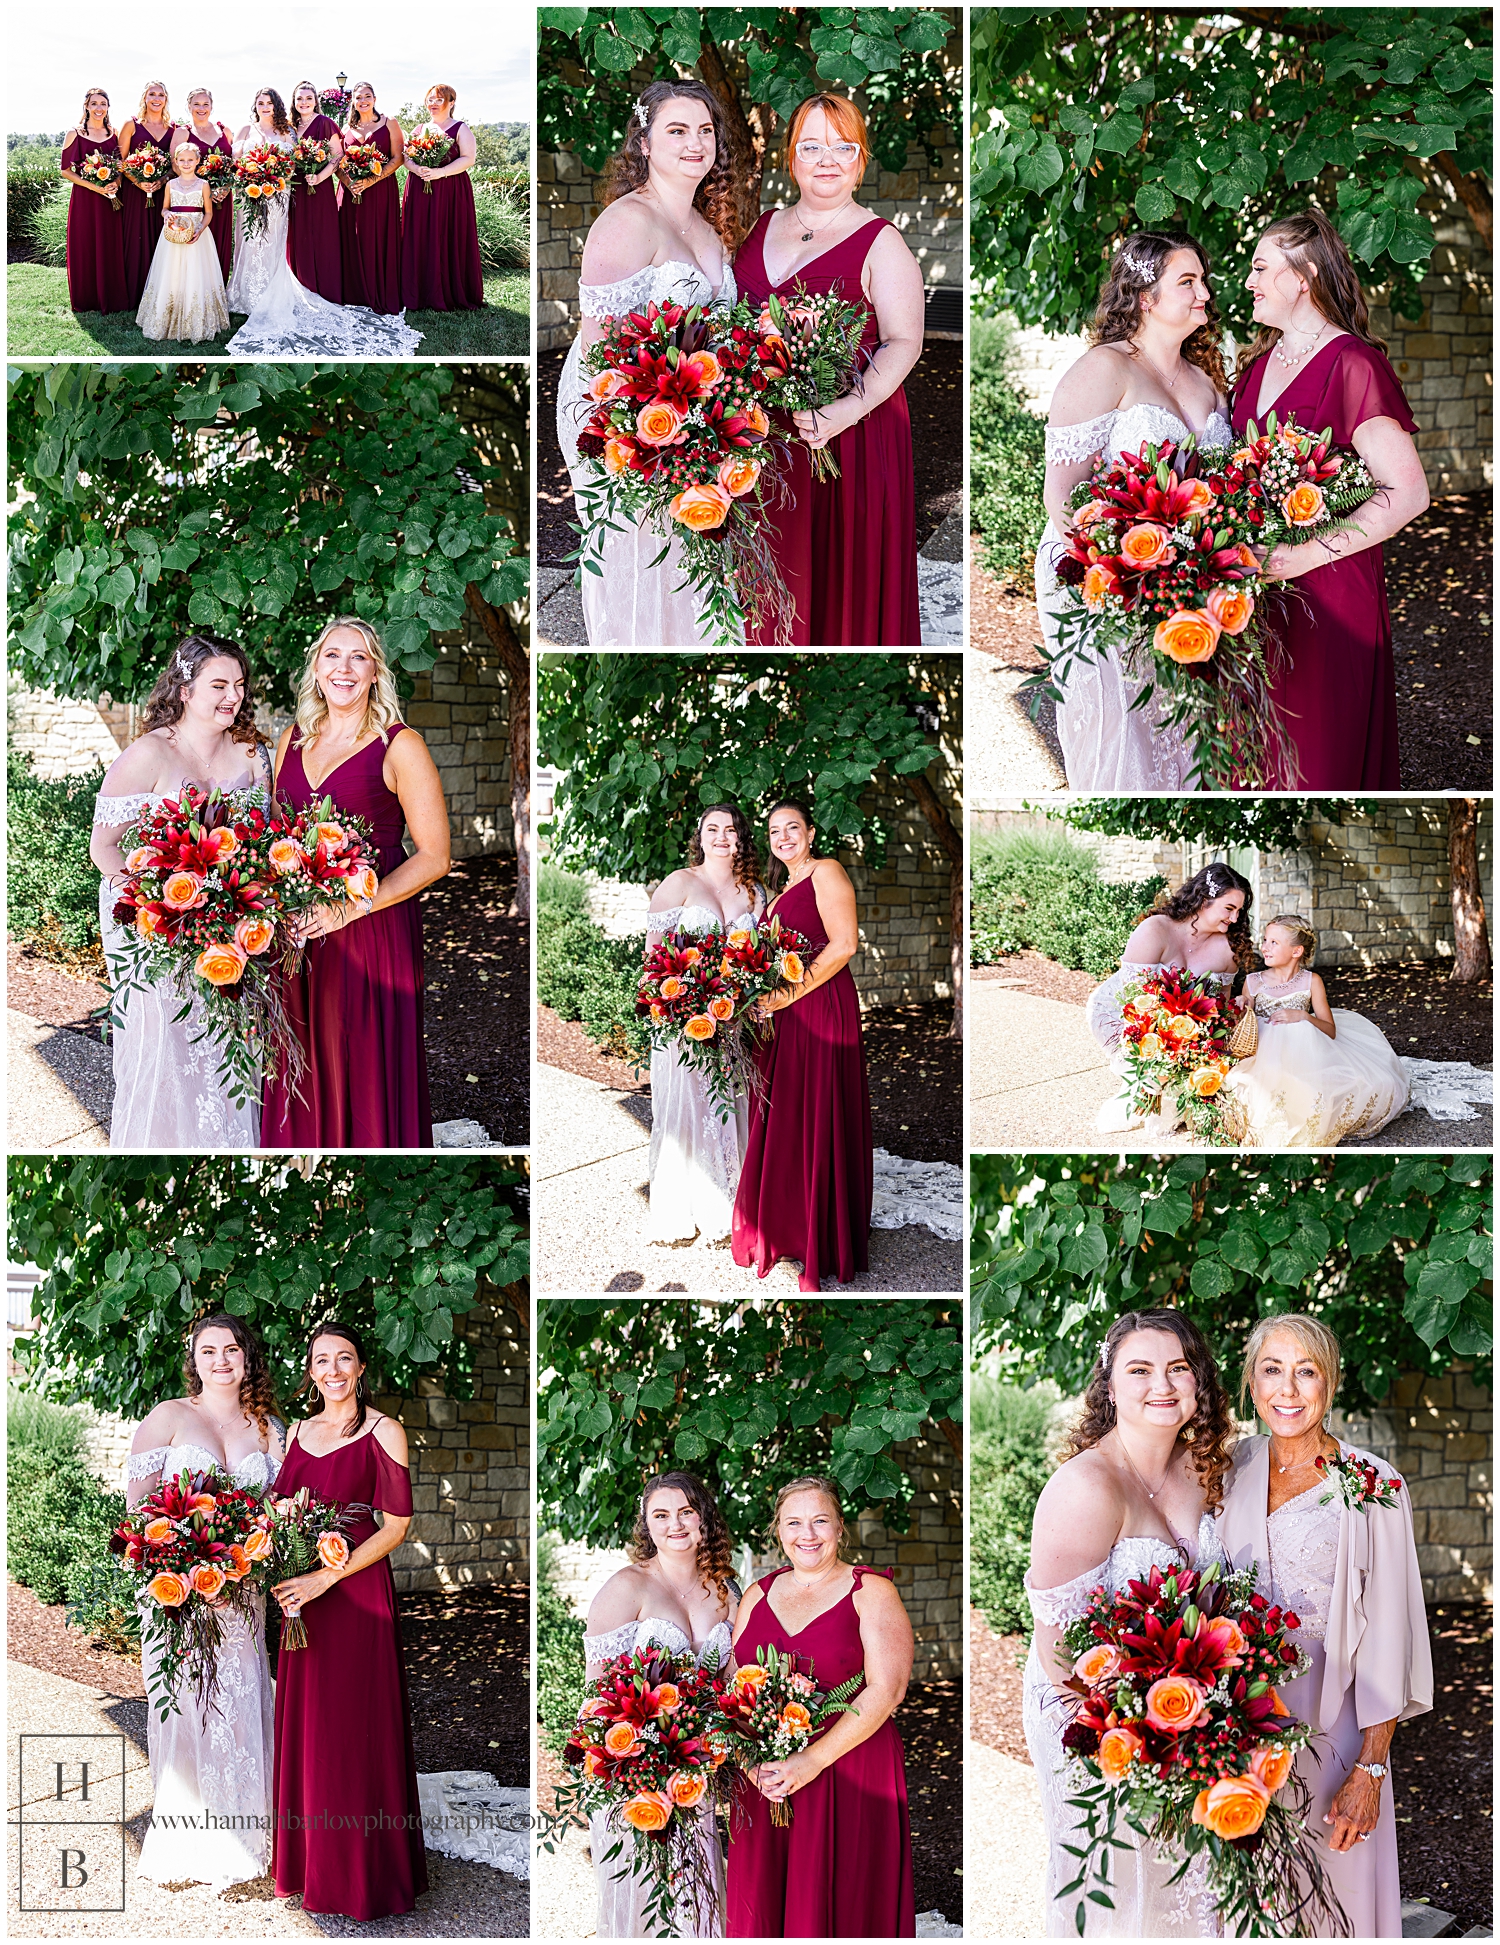 Bride and bridesmaids in maroon dresses pose for photos.